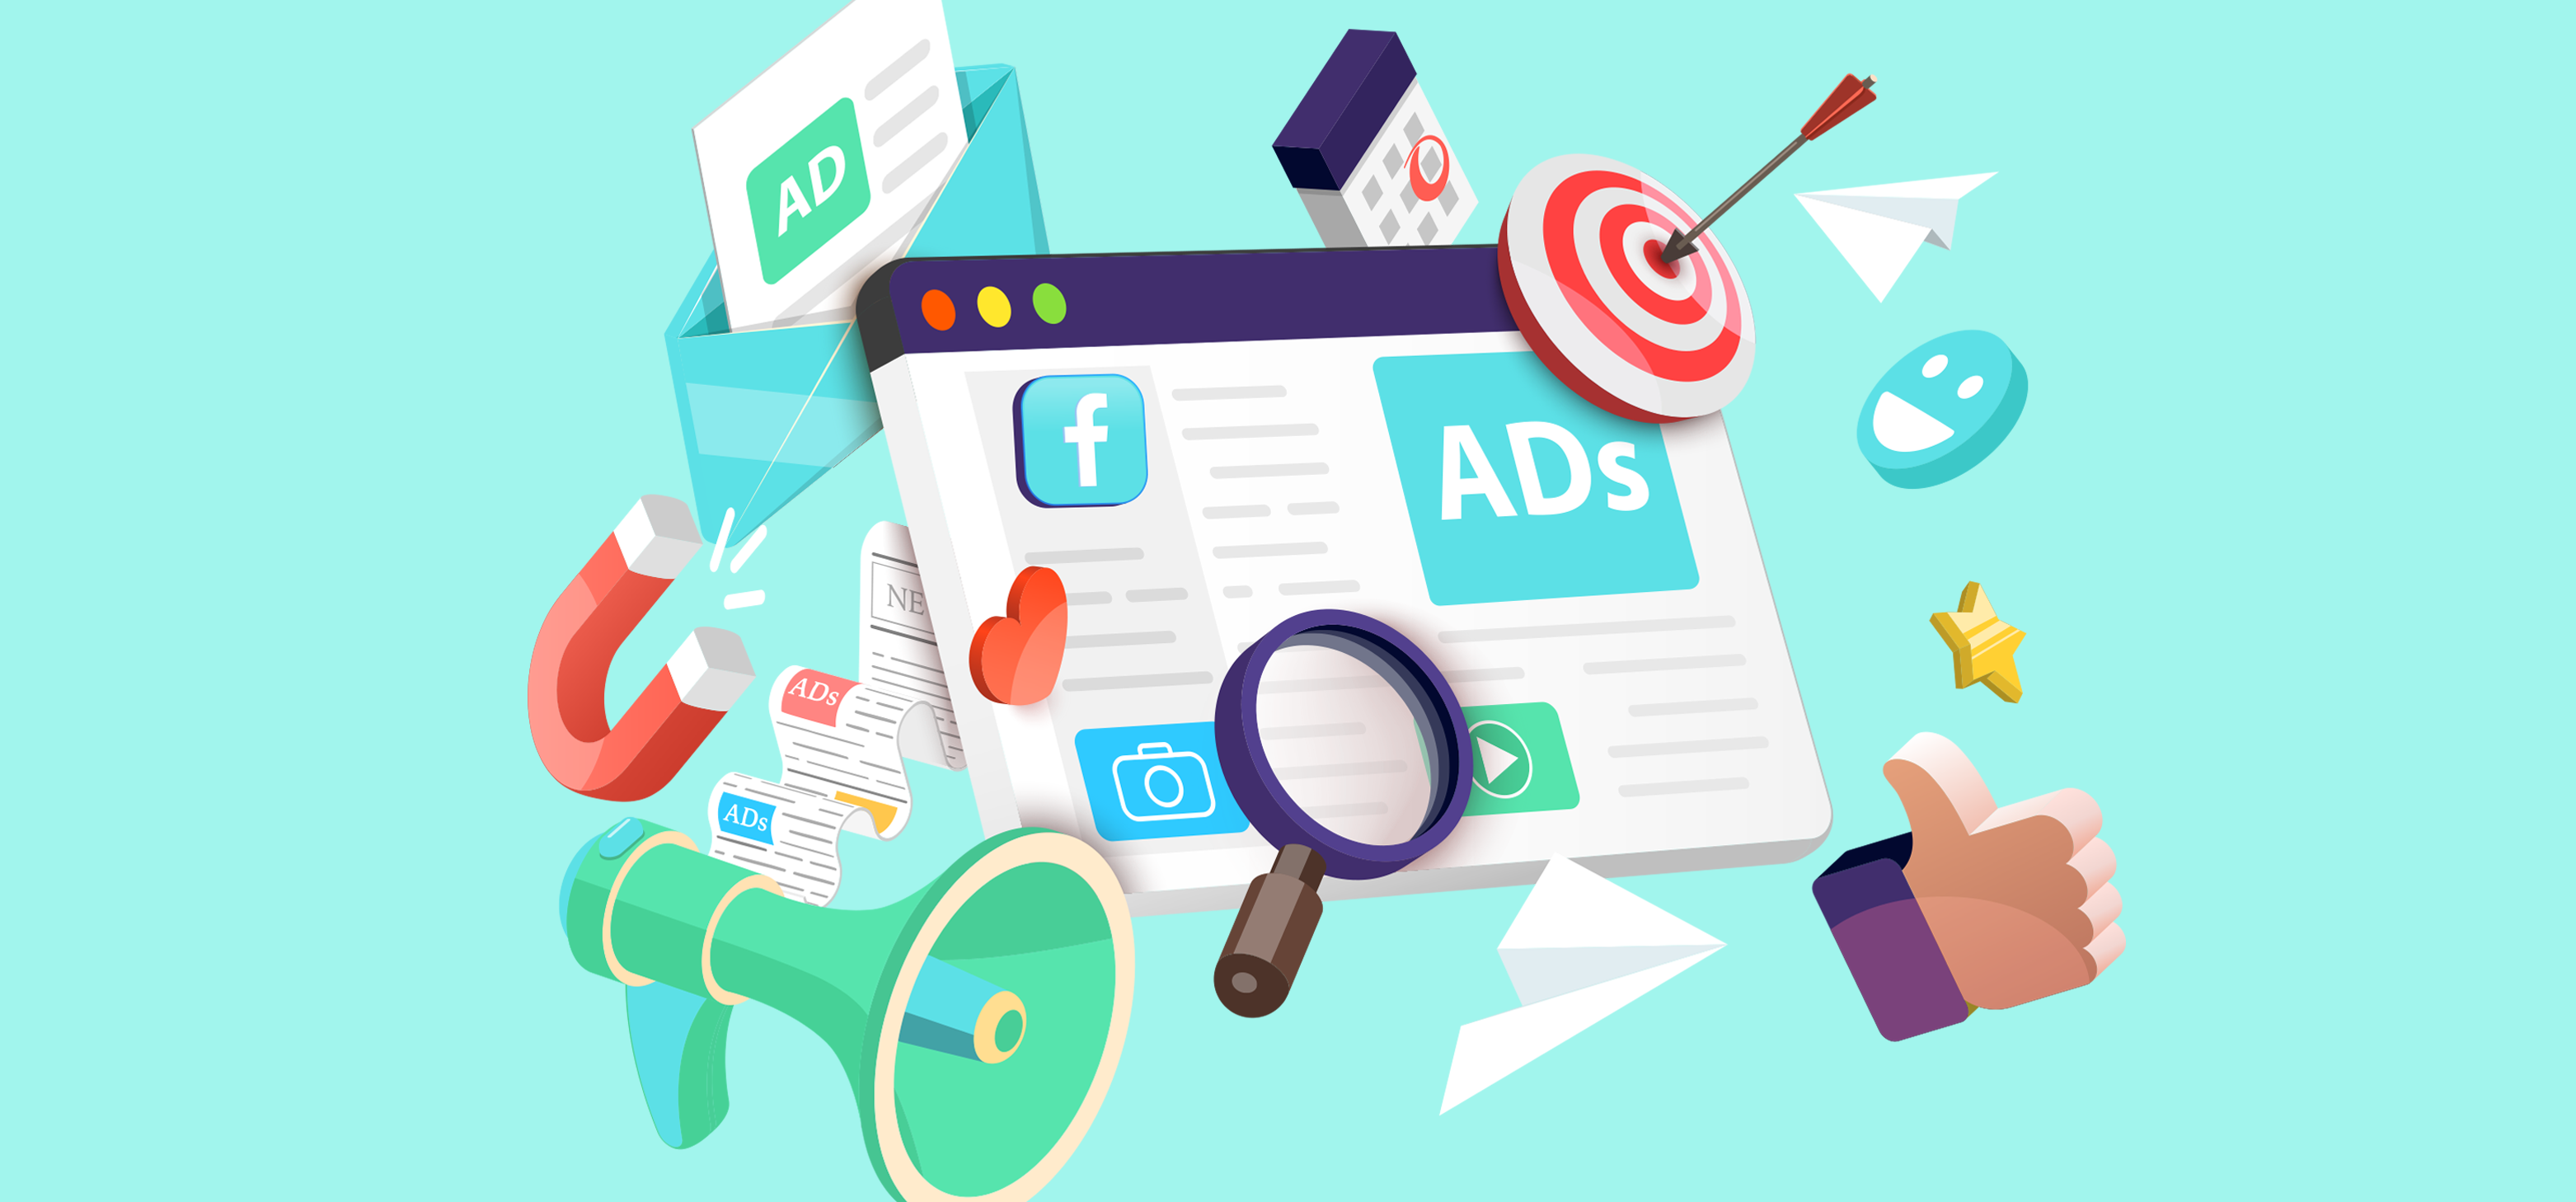 Best Facebook Ads marketing tools and software